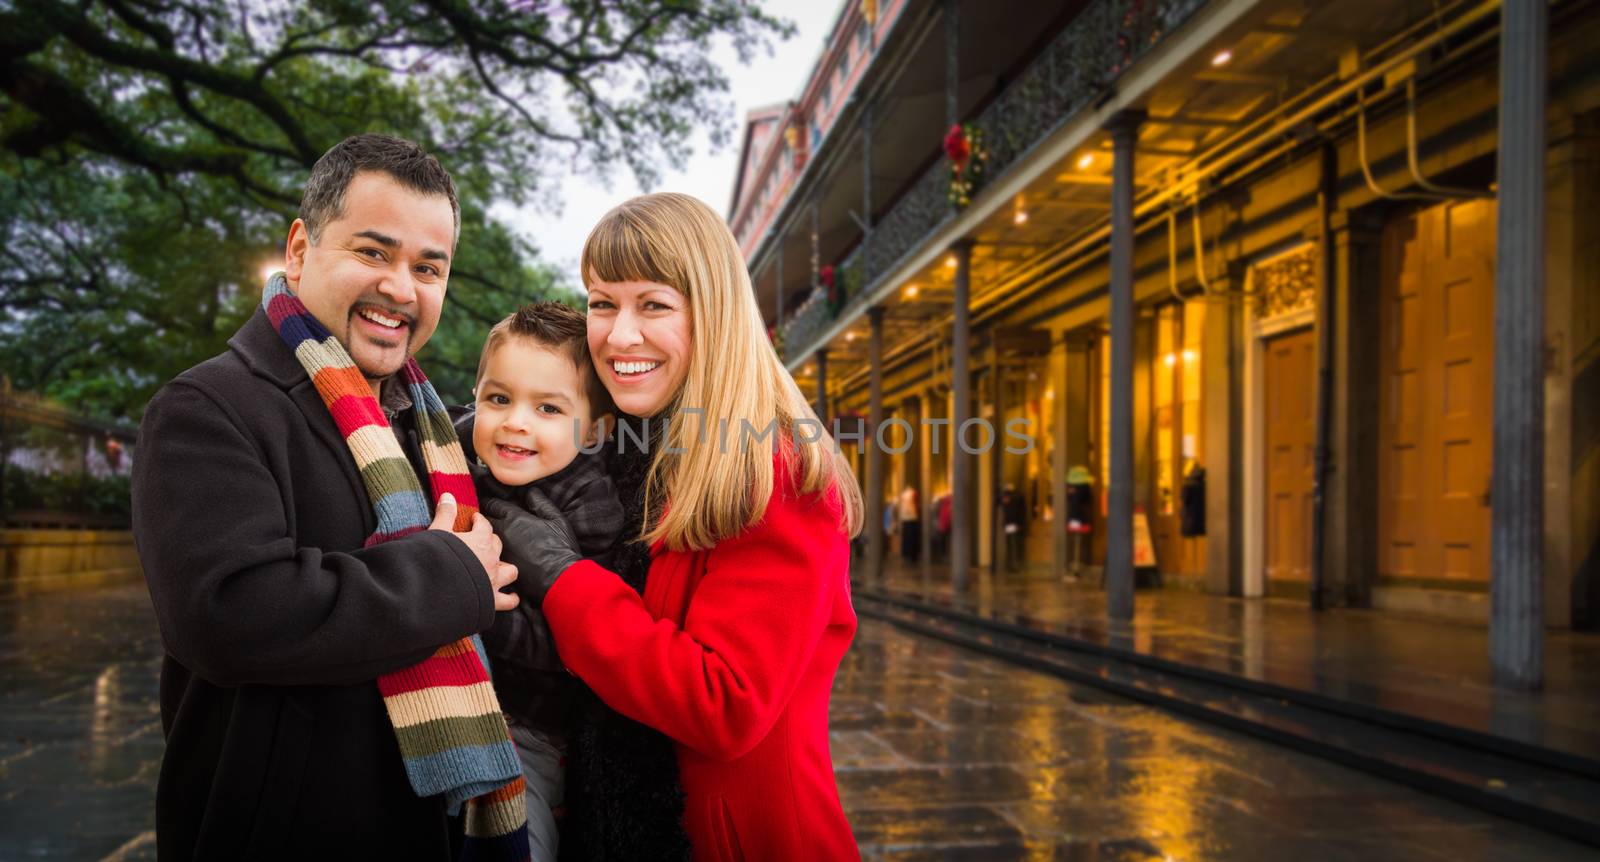 Happy Young Mixed Race Family Enjoying an Evening in New Orleans, Louisiana by Feverpitched